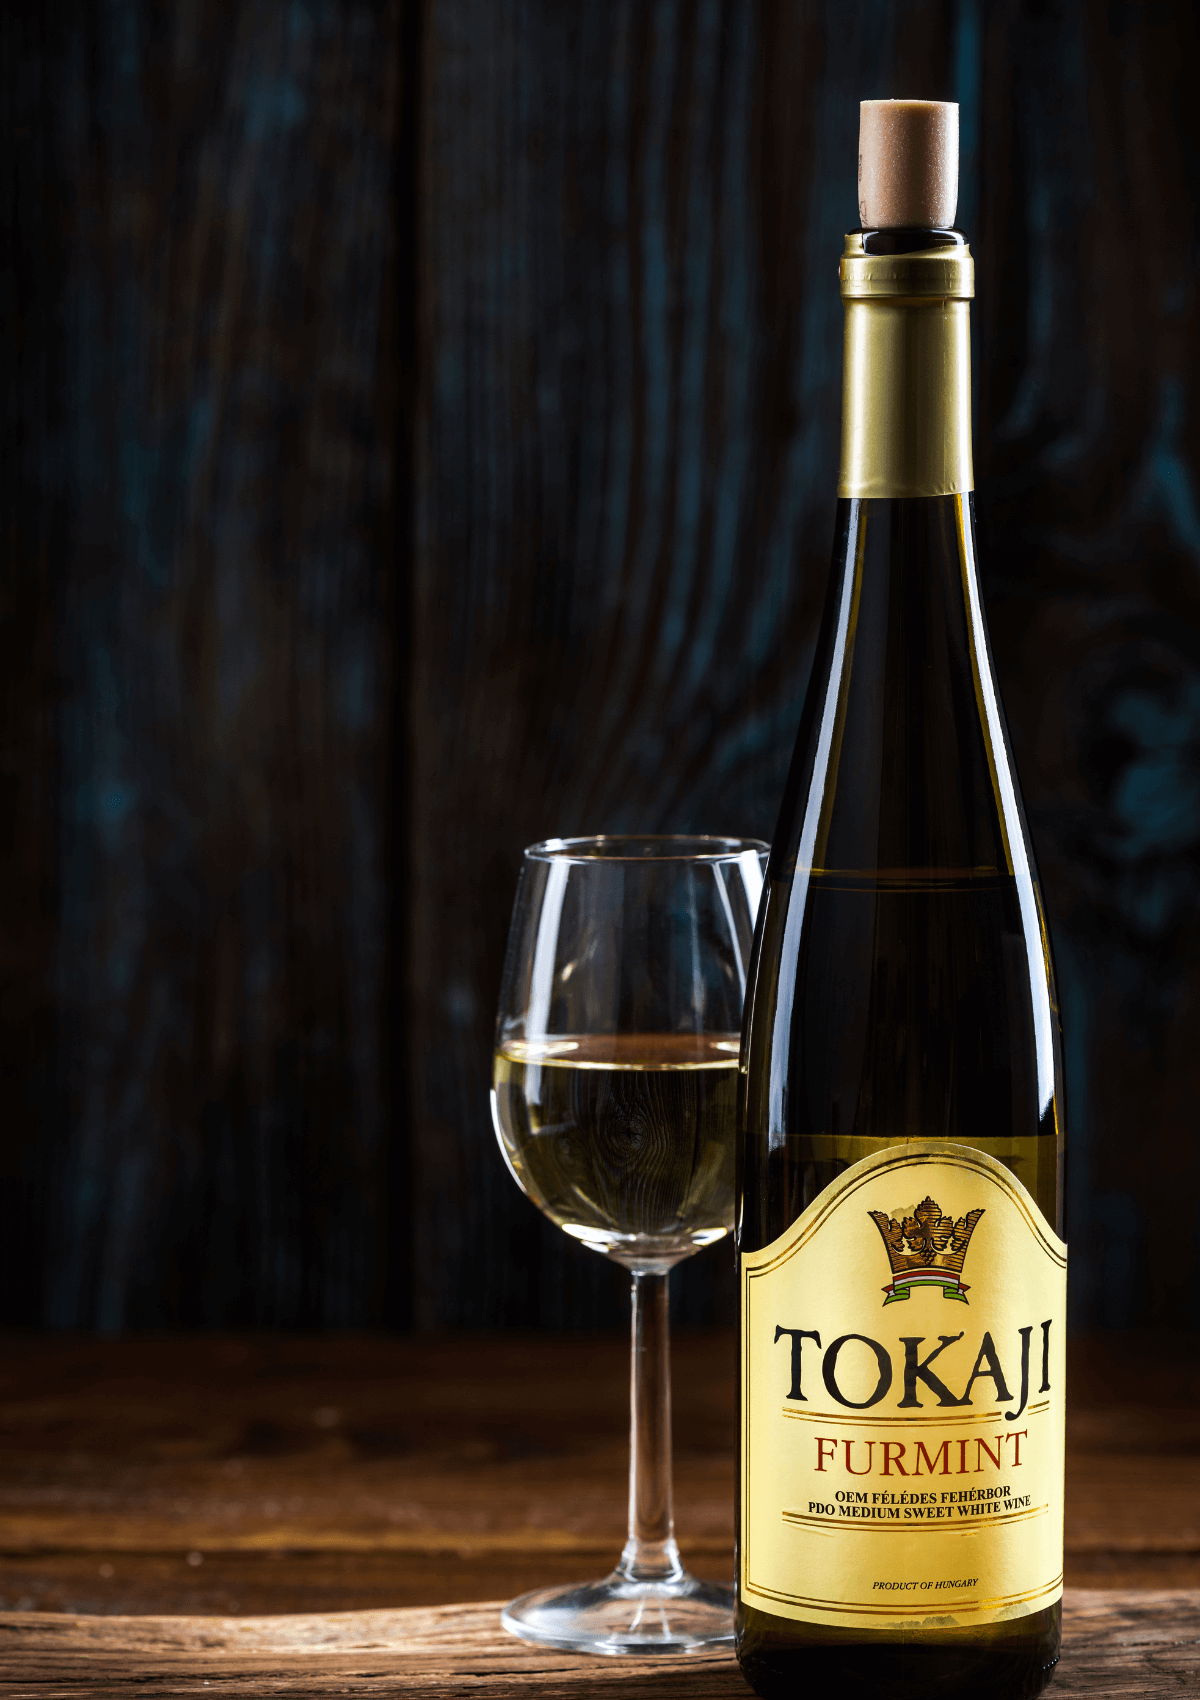 Tokaji is one of the most popular souvenirs from Budapest